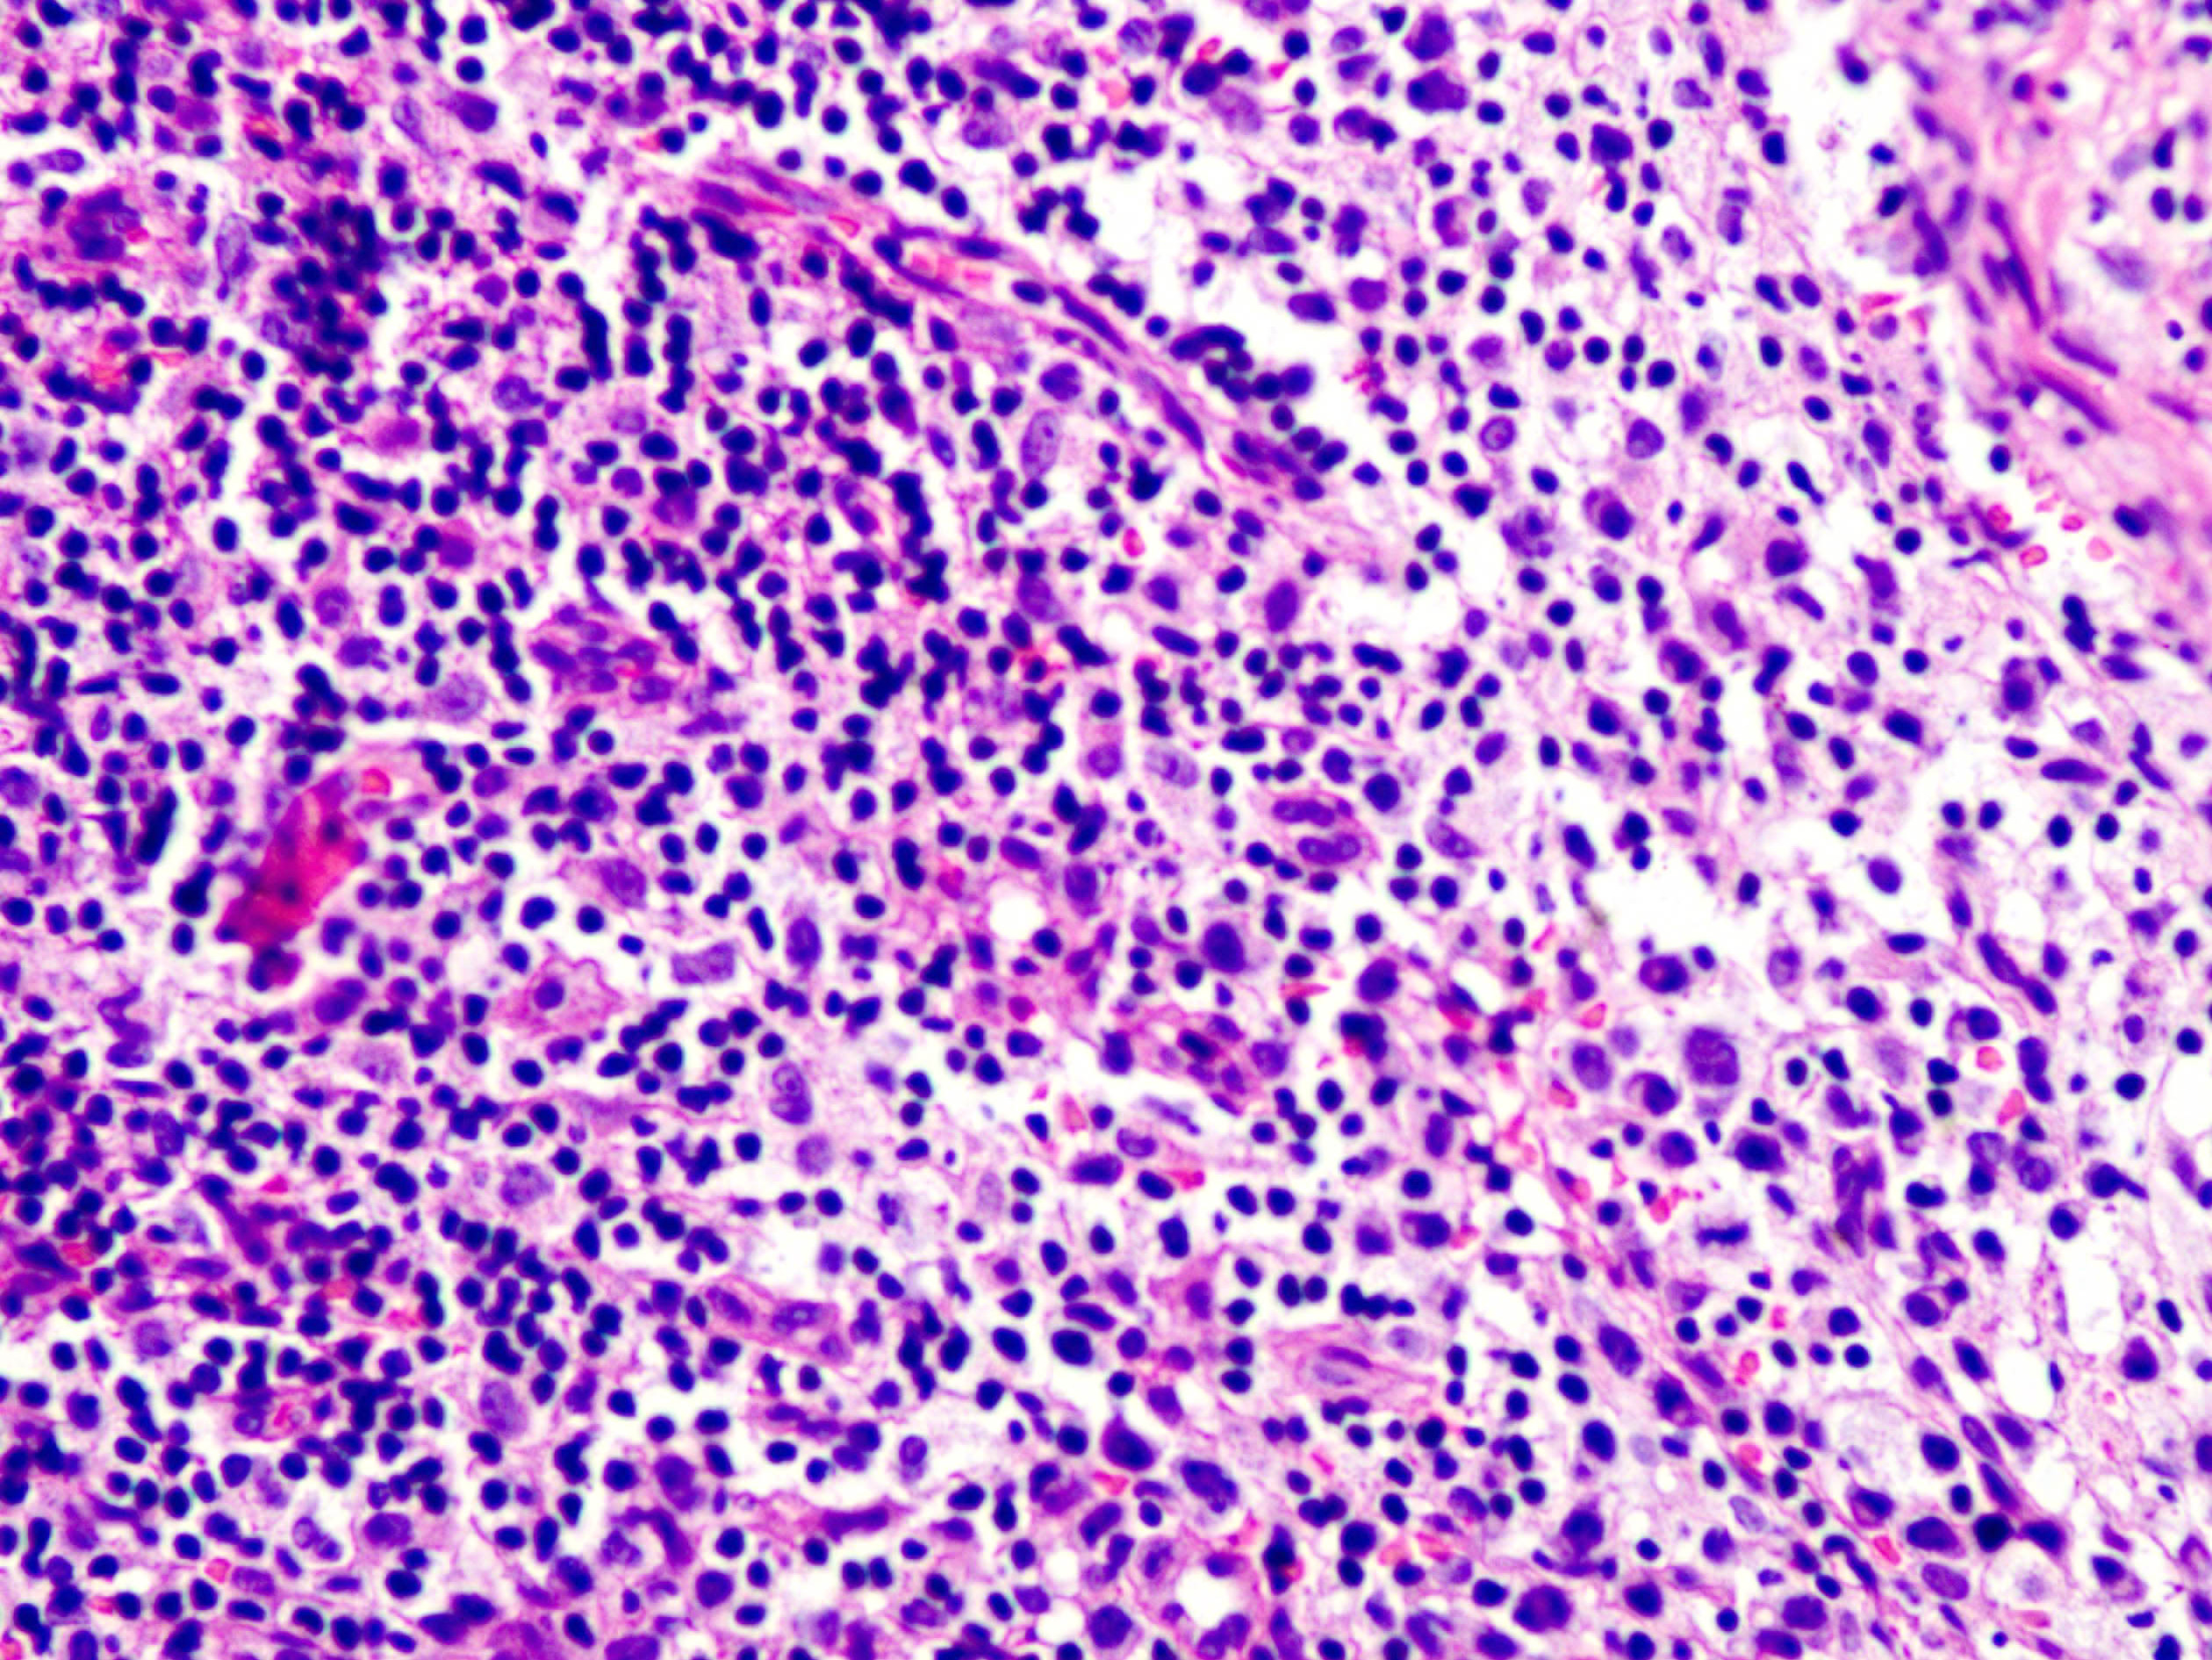 Some lymphocyte morphologies of the right inguinal lymph node are mildly atypical, invading the follicle (hematoxylin-eosin stain, magnification ×400)